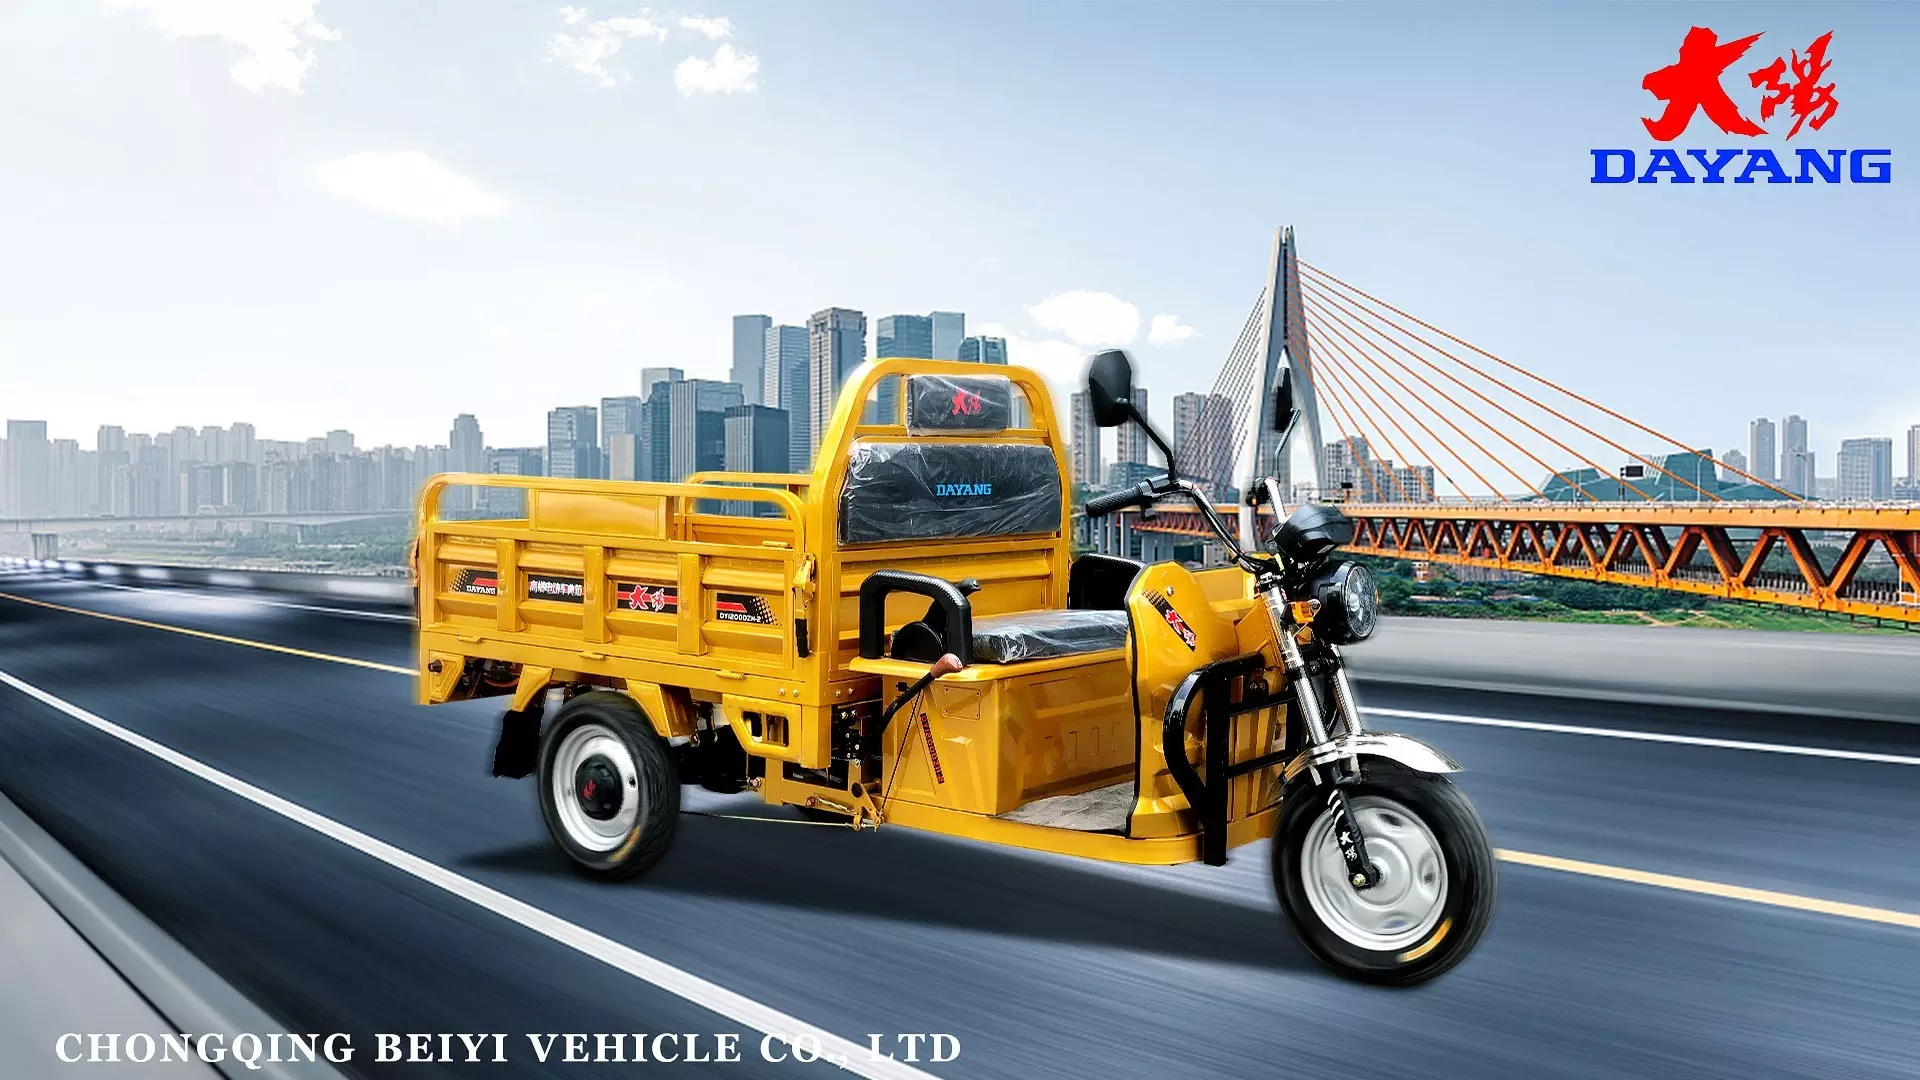 2021 Best Safety and Popular 72V 1000W  Electric Adult Tricycle for Cargo Max Body Trip Power Rickshaw yellow  Body OEM Lights